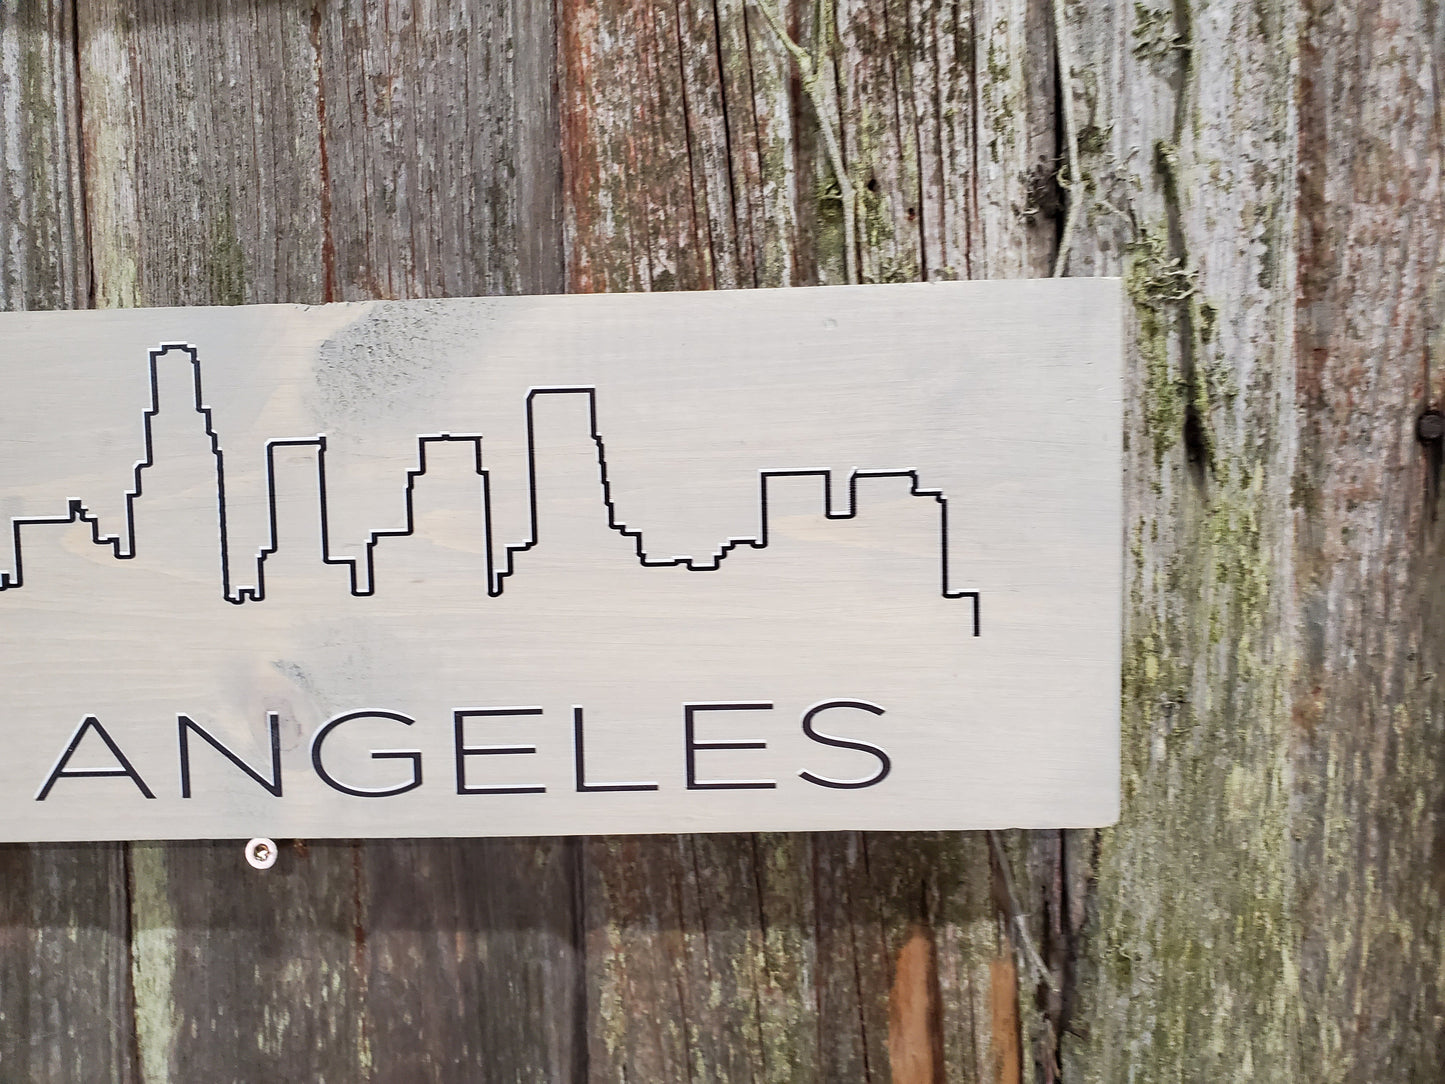 Los Angeles Skyline Sign Silhouette Sign Town Gift Wood Printed Shelf Sitter Block Wall Art Decor Hanger Home Gift